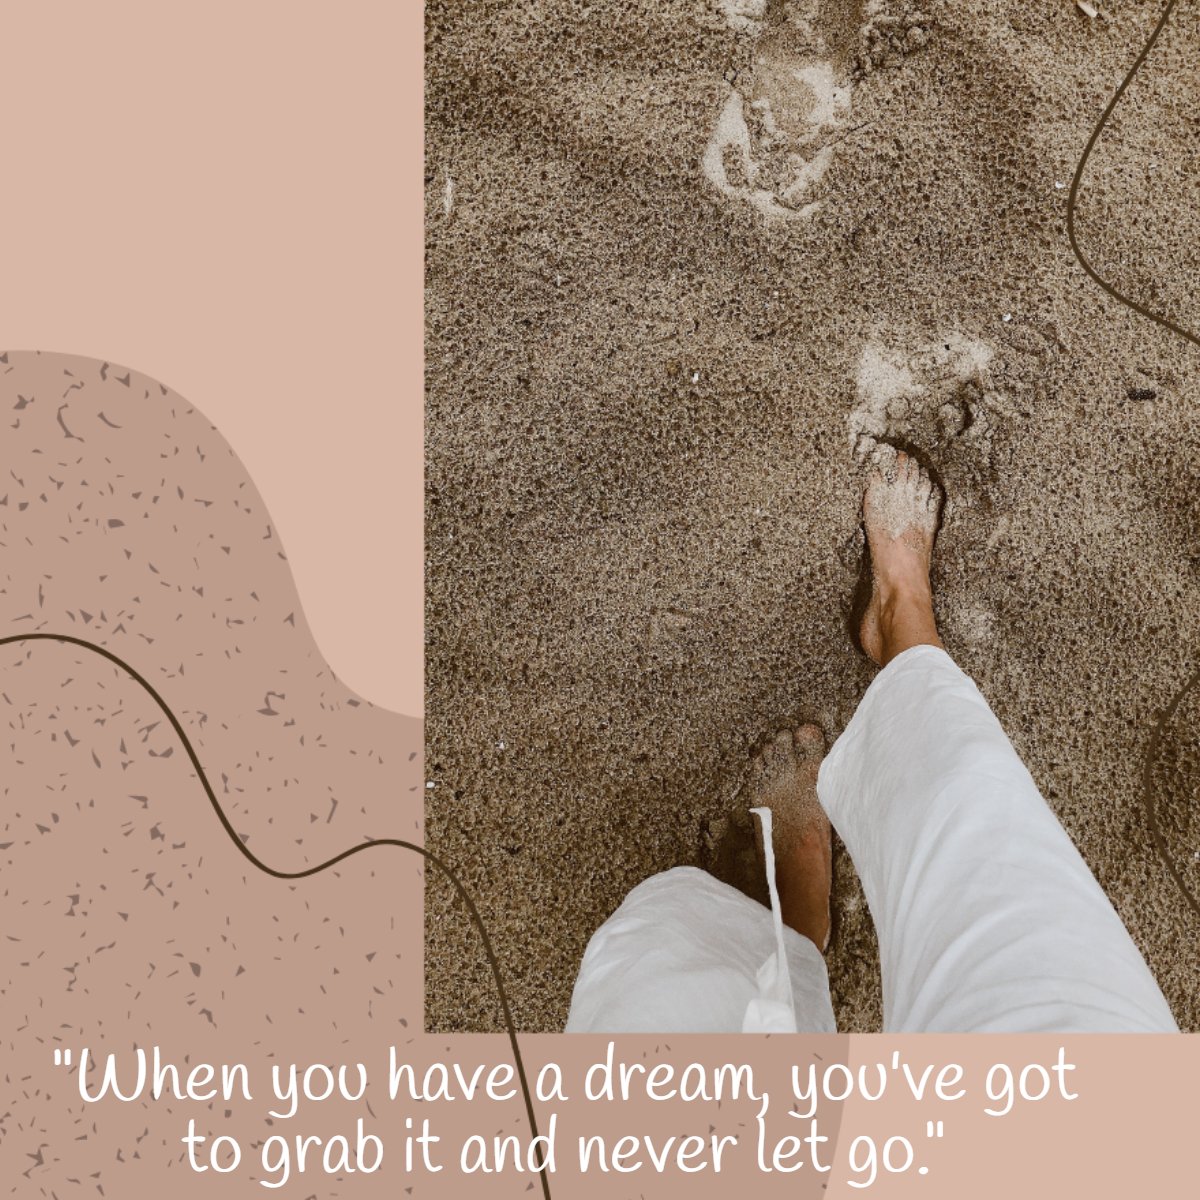 'When you have a dream, you've got to grab it and never let go'
― Carol Burnett

#Motivation    #QuoteofTheDay     #quoteoftheday✏️
#angelagribbinsrealtor #angelagribbinsrealestate #lakenormanrealty